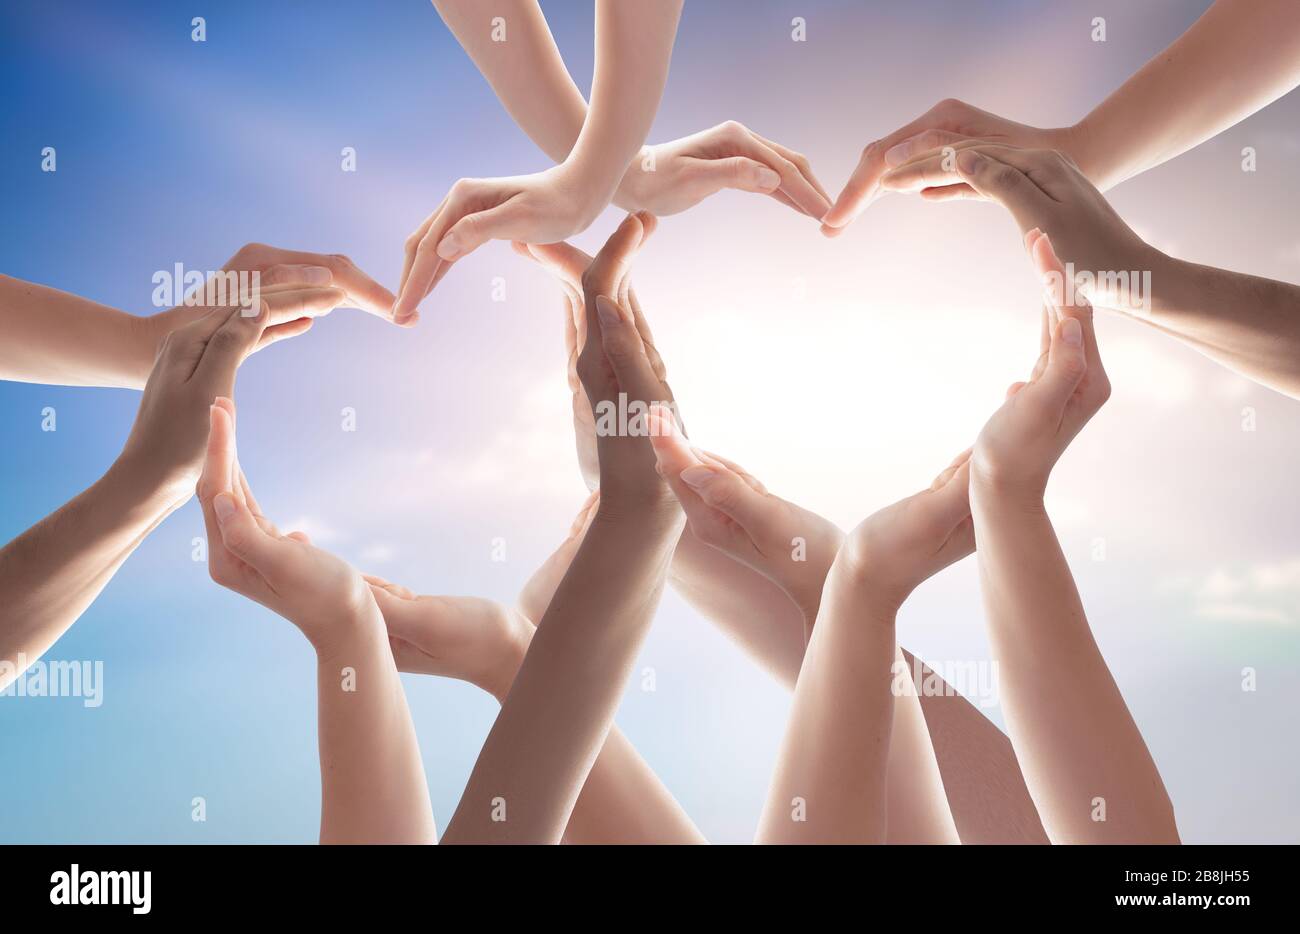 Symbol and shape of heart created from hands.The concept of unity, cooperation, partnership, teamwork and charity. Stock Photo